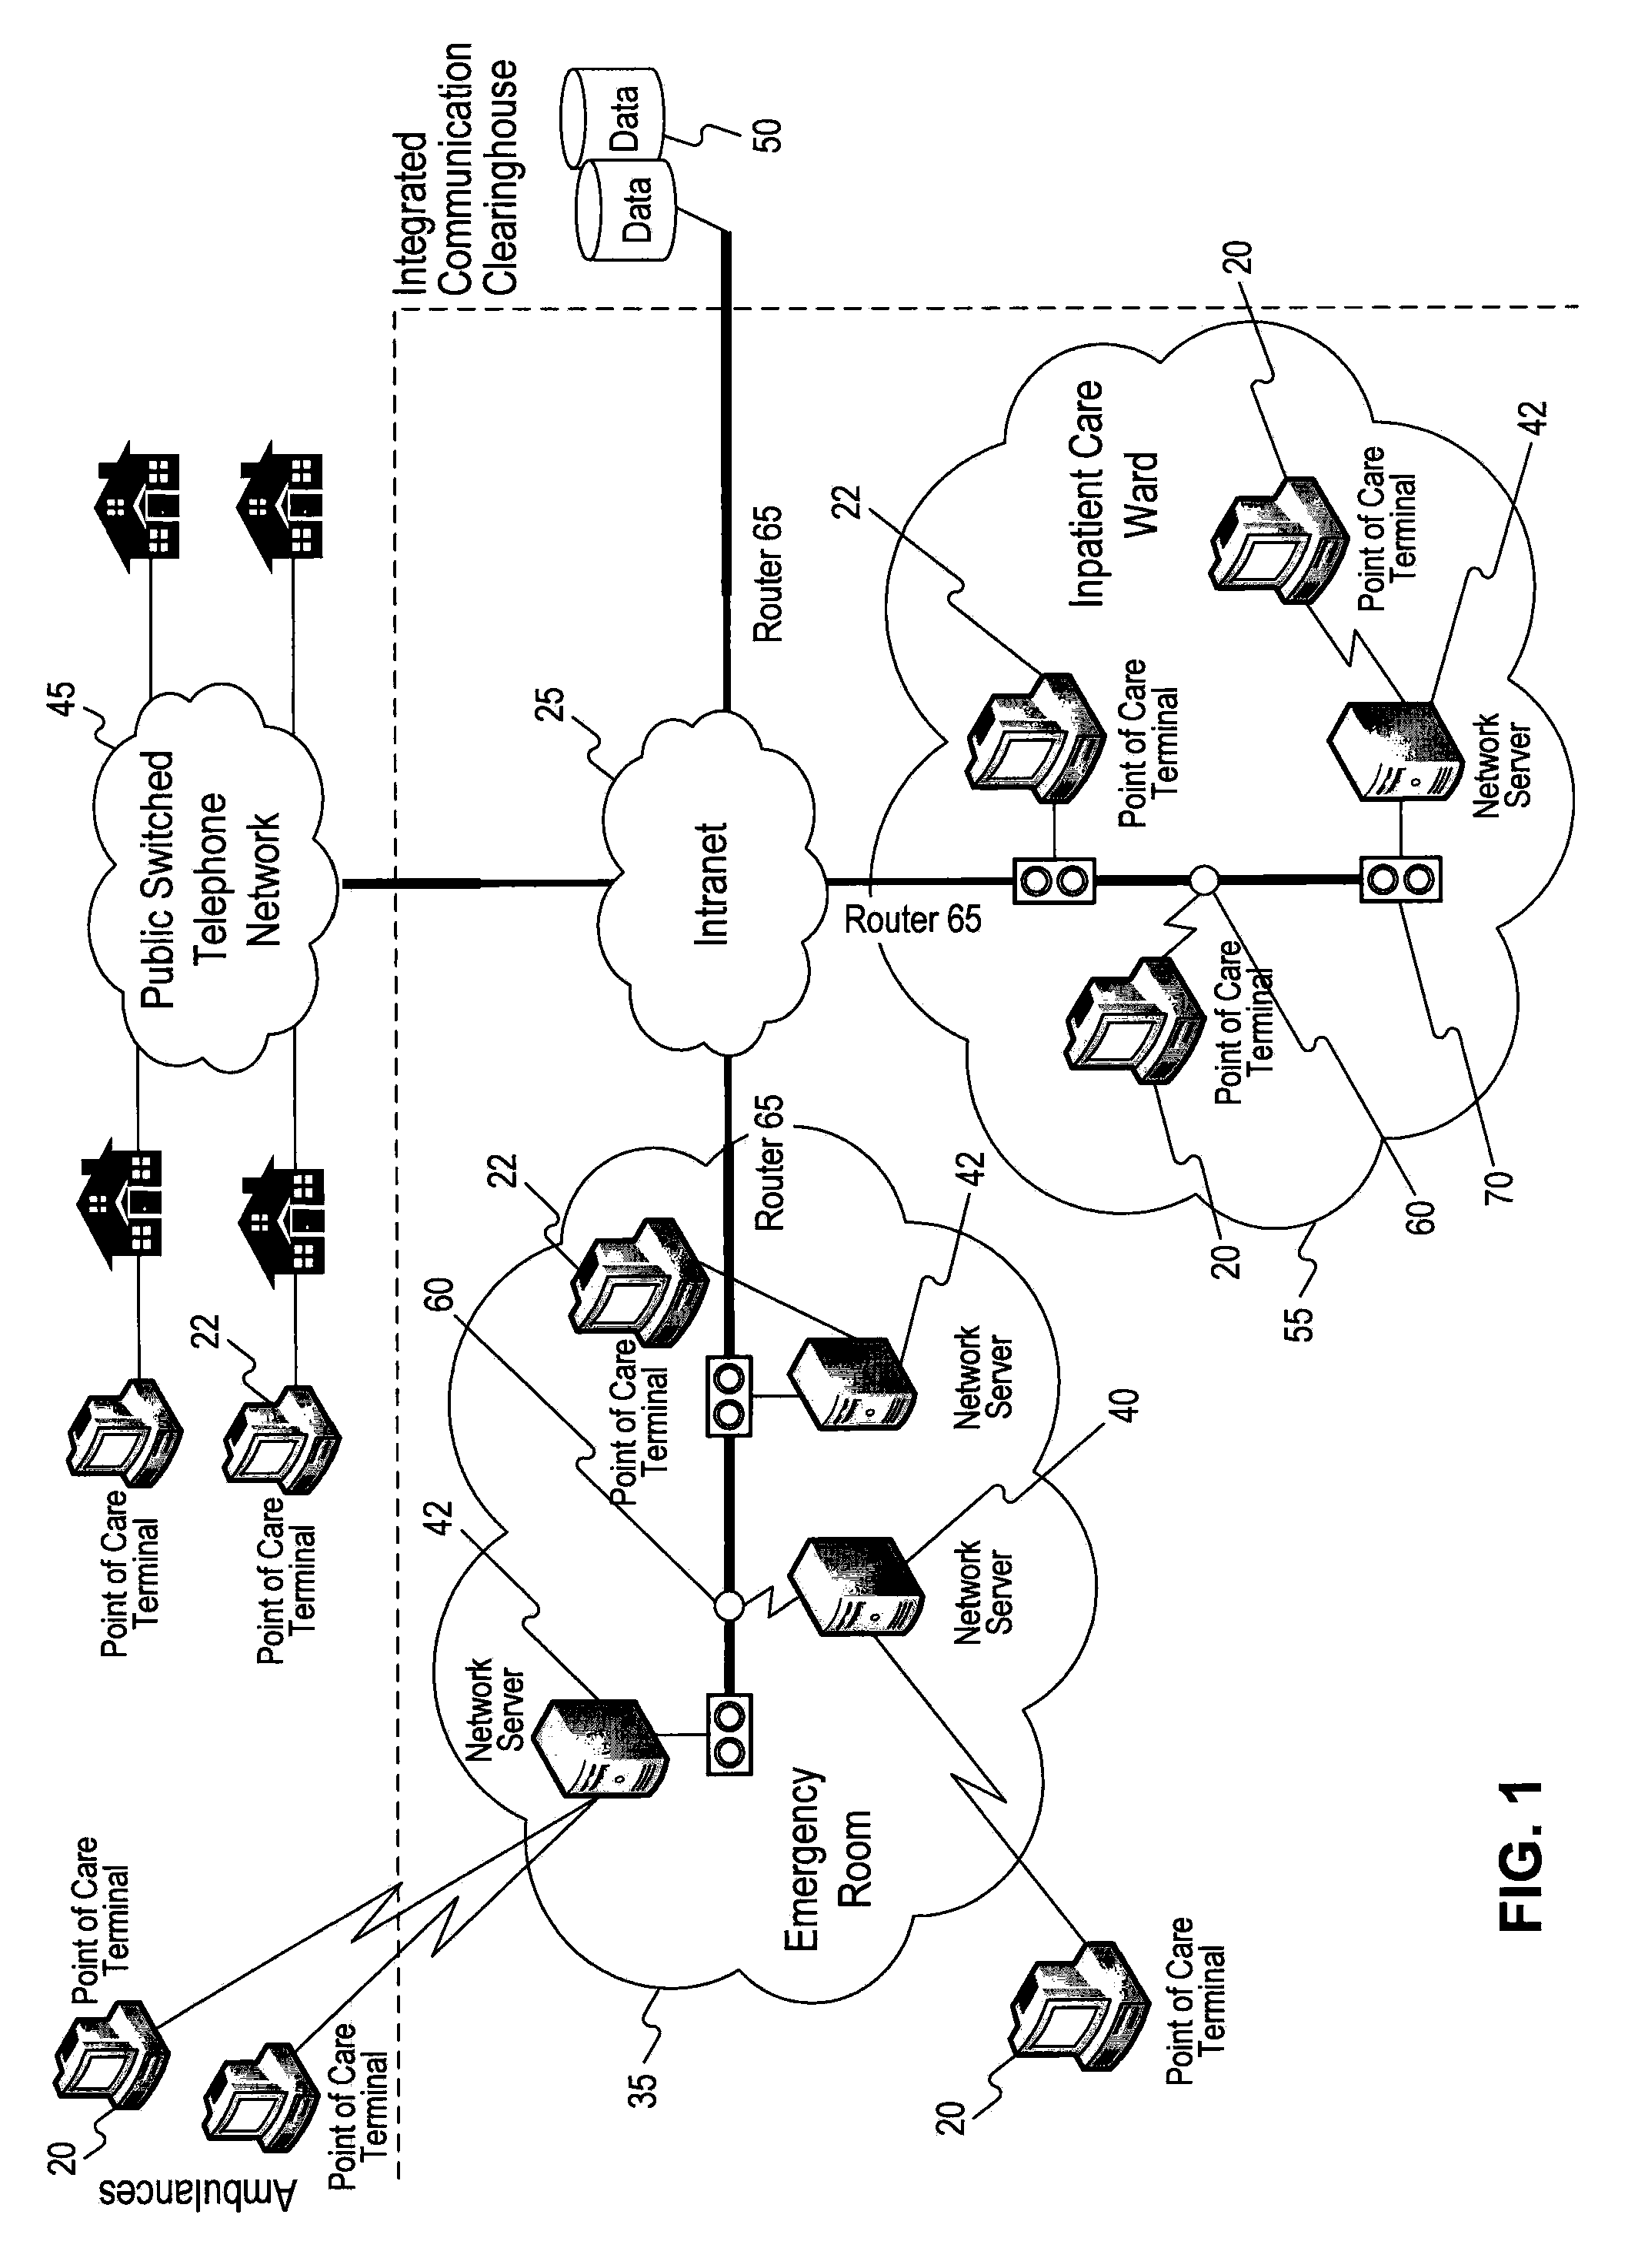 Method and apparatus for integrated communication services provisioning for health care community